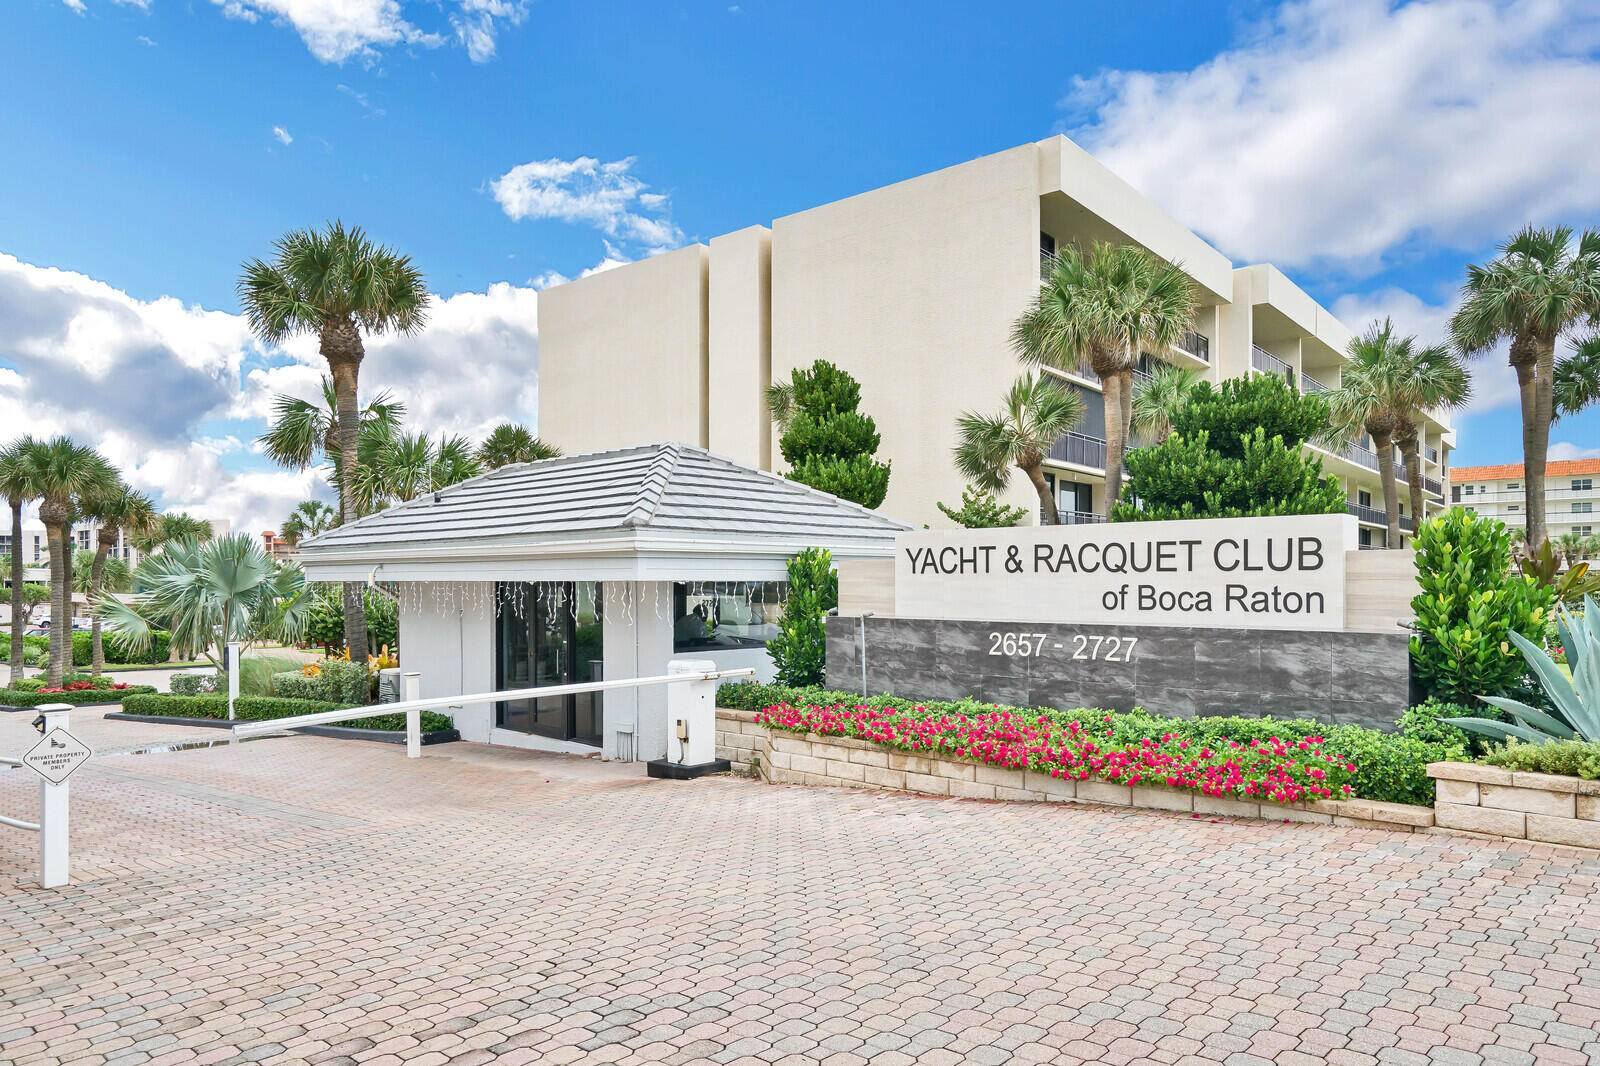 LOVELY 2BR 2BA CONDO STEPS FROM THE OCEAN at the exclusive resort like Yacht Racquet Club of Boca Raton.